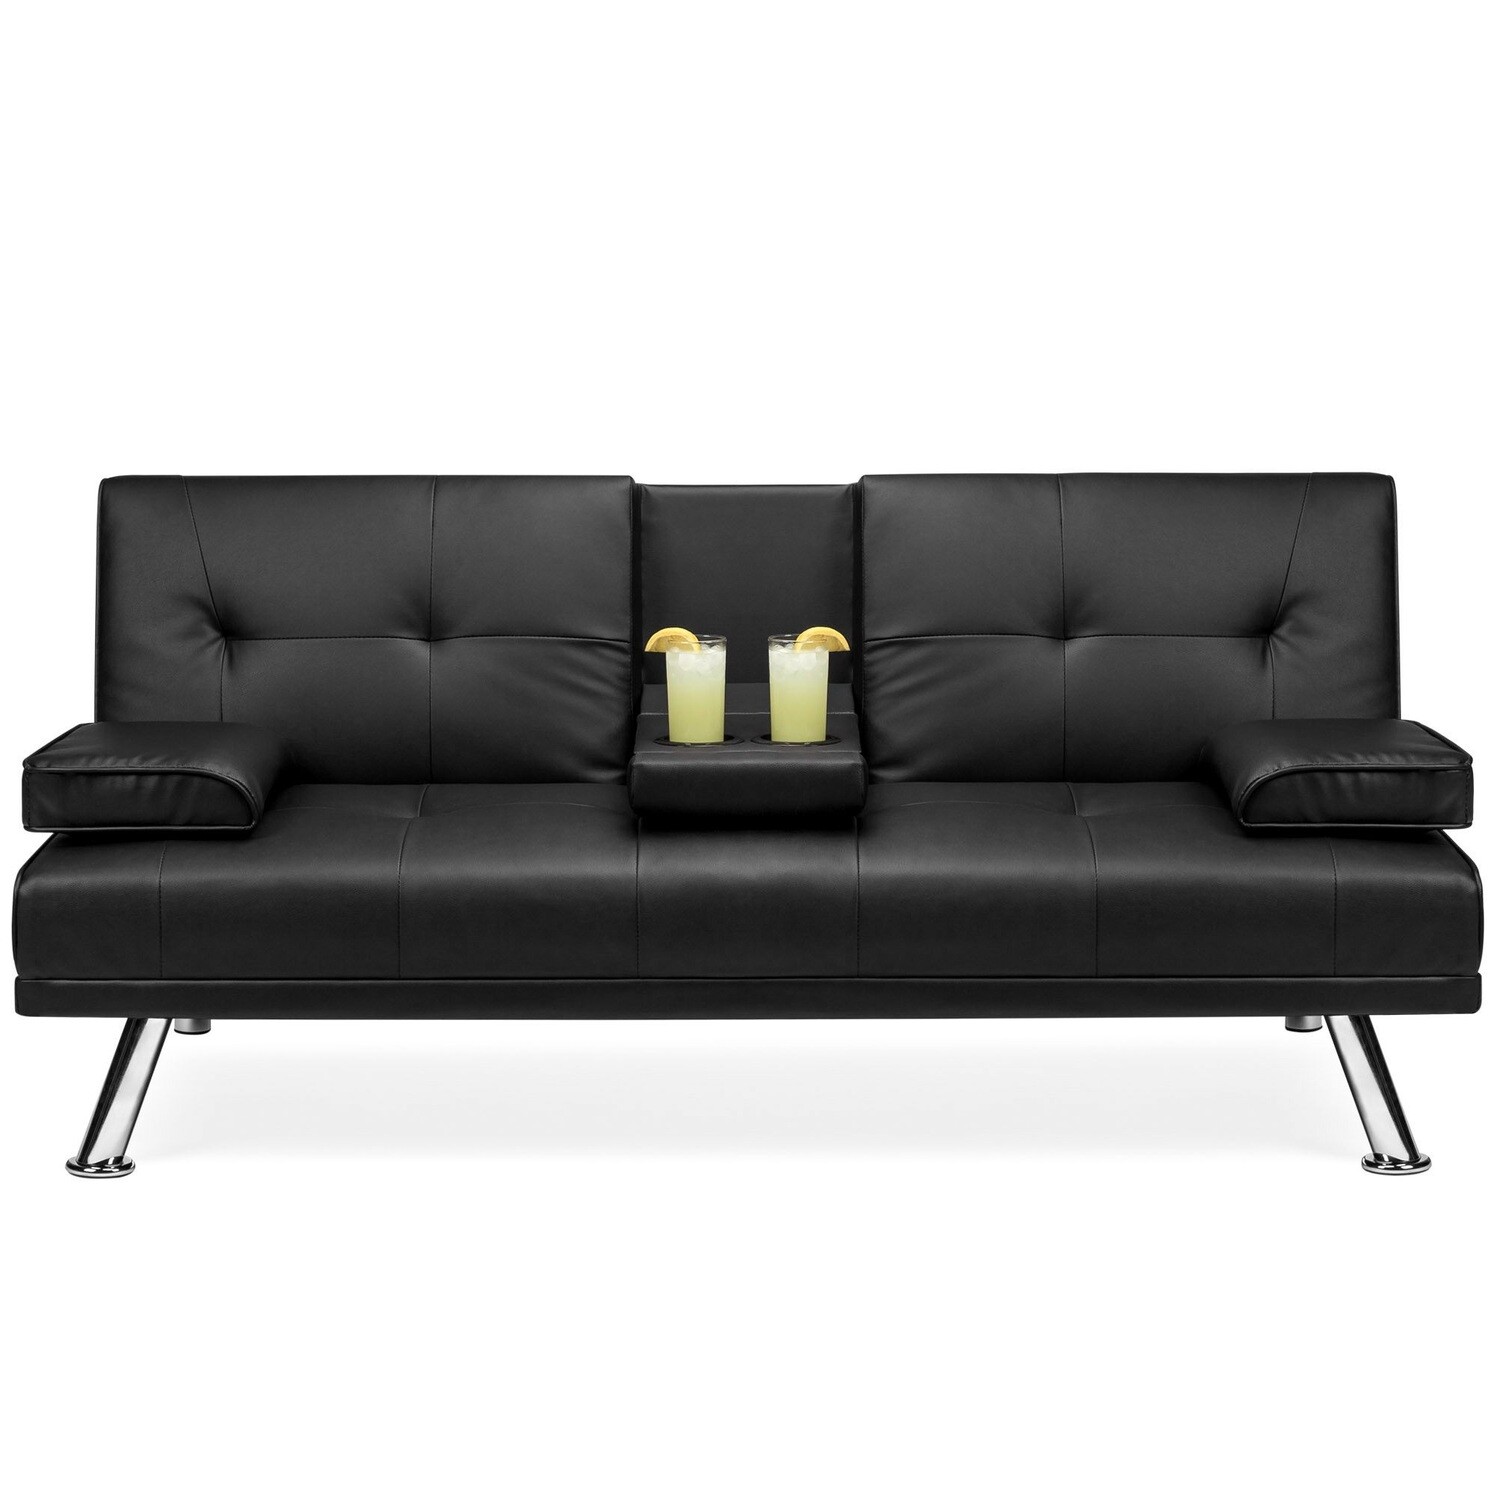 Modern Faux Leather Convertible Futon Sofa w/ Removable Armrests, Metal Legs, 2 Cupholders - Black - Free delivery